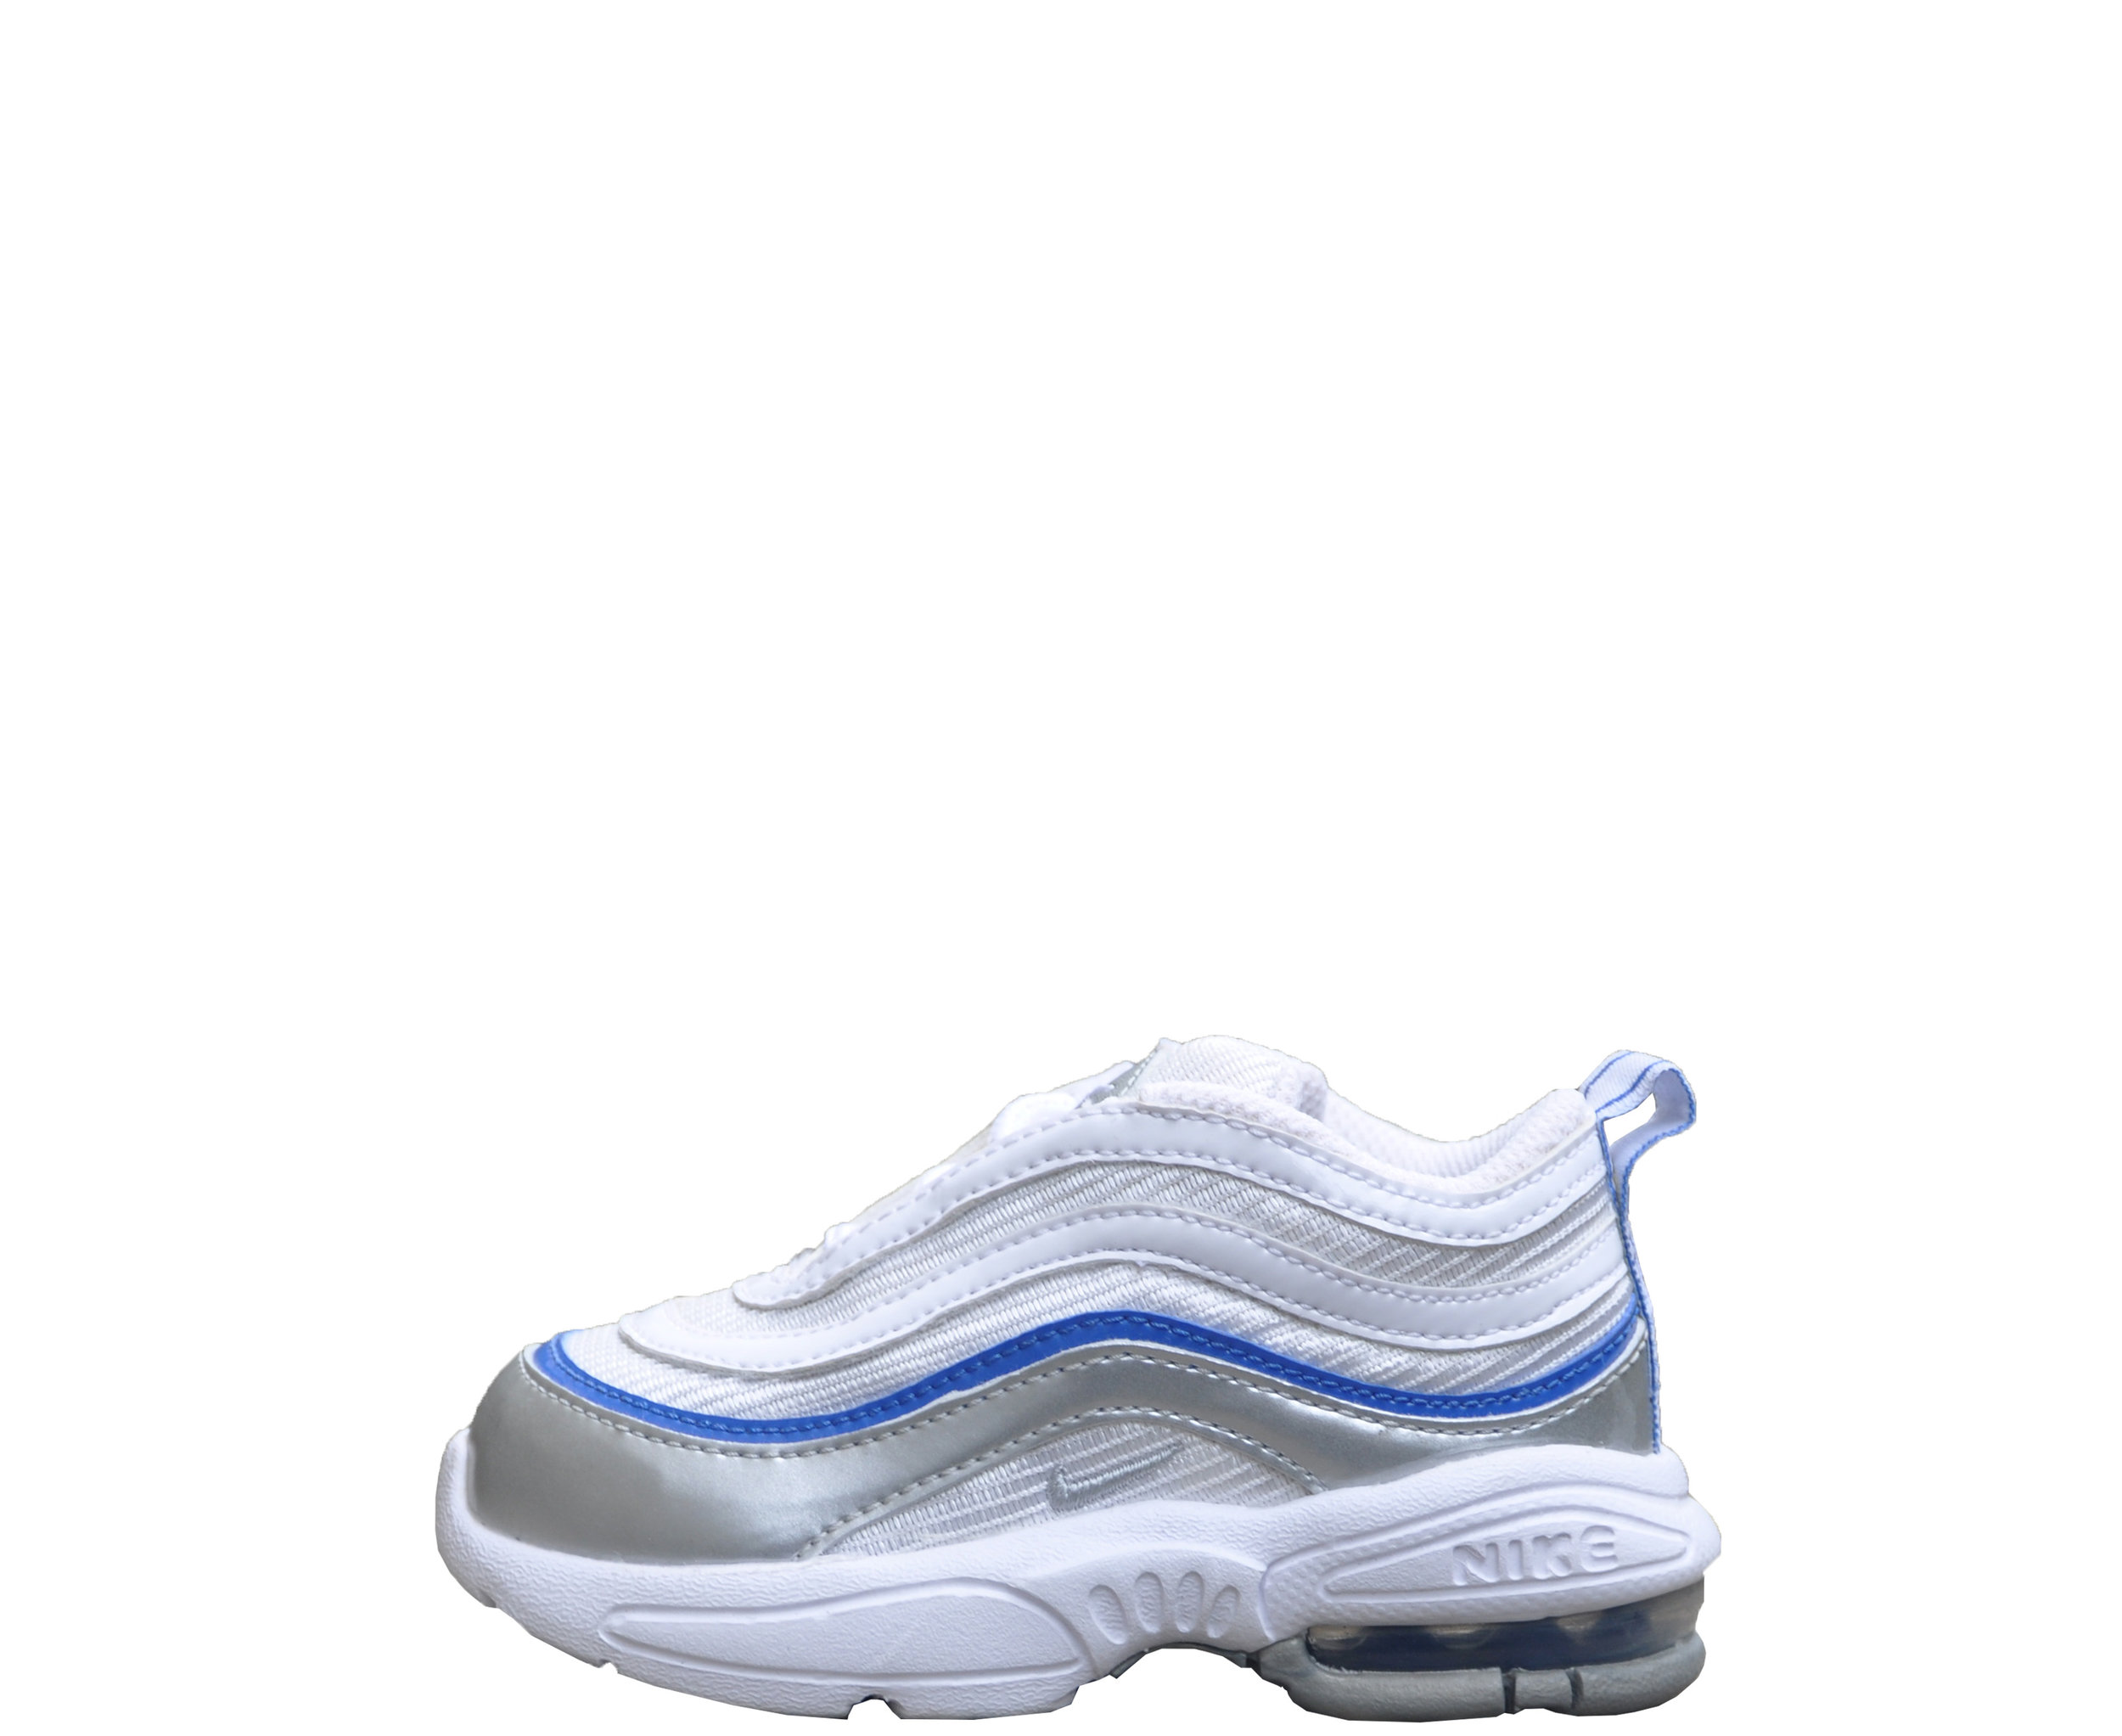 nike air max 97 baby size